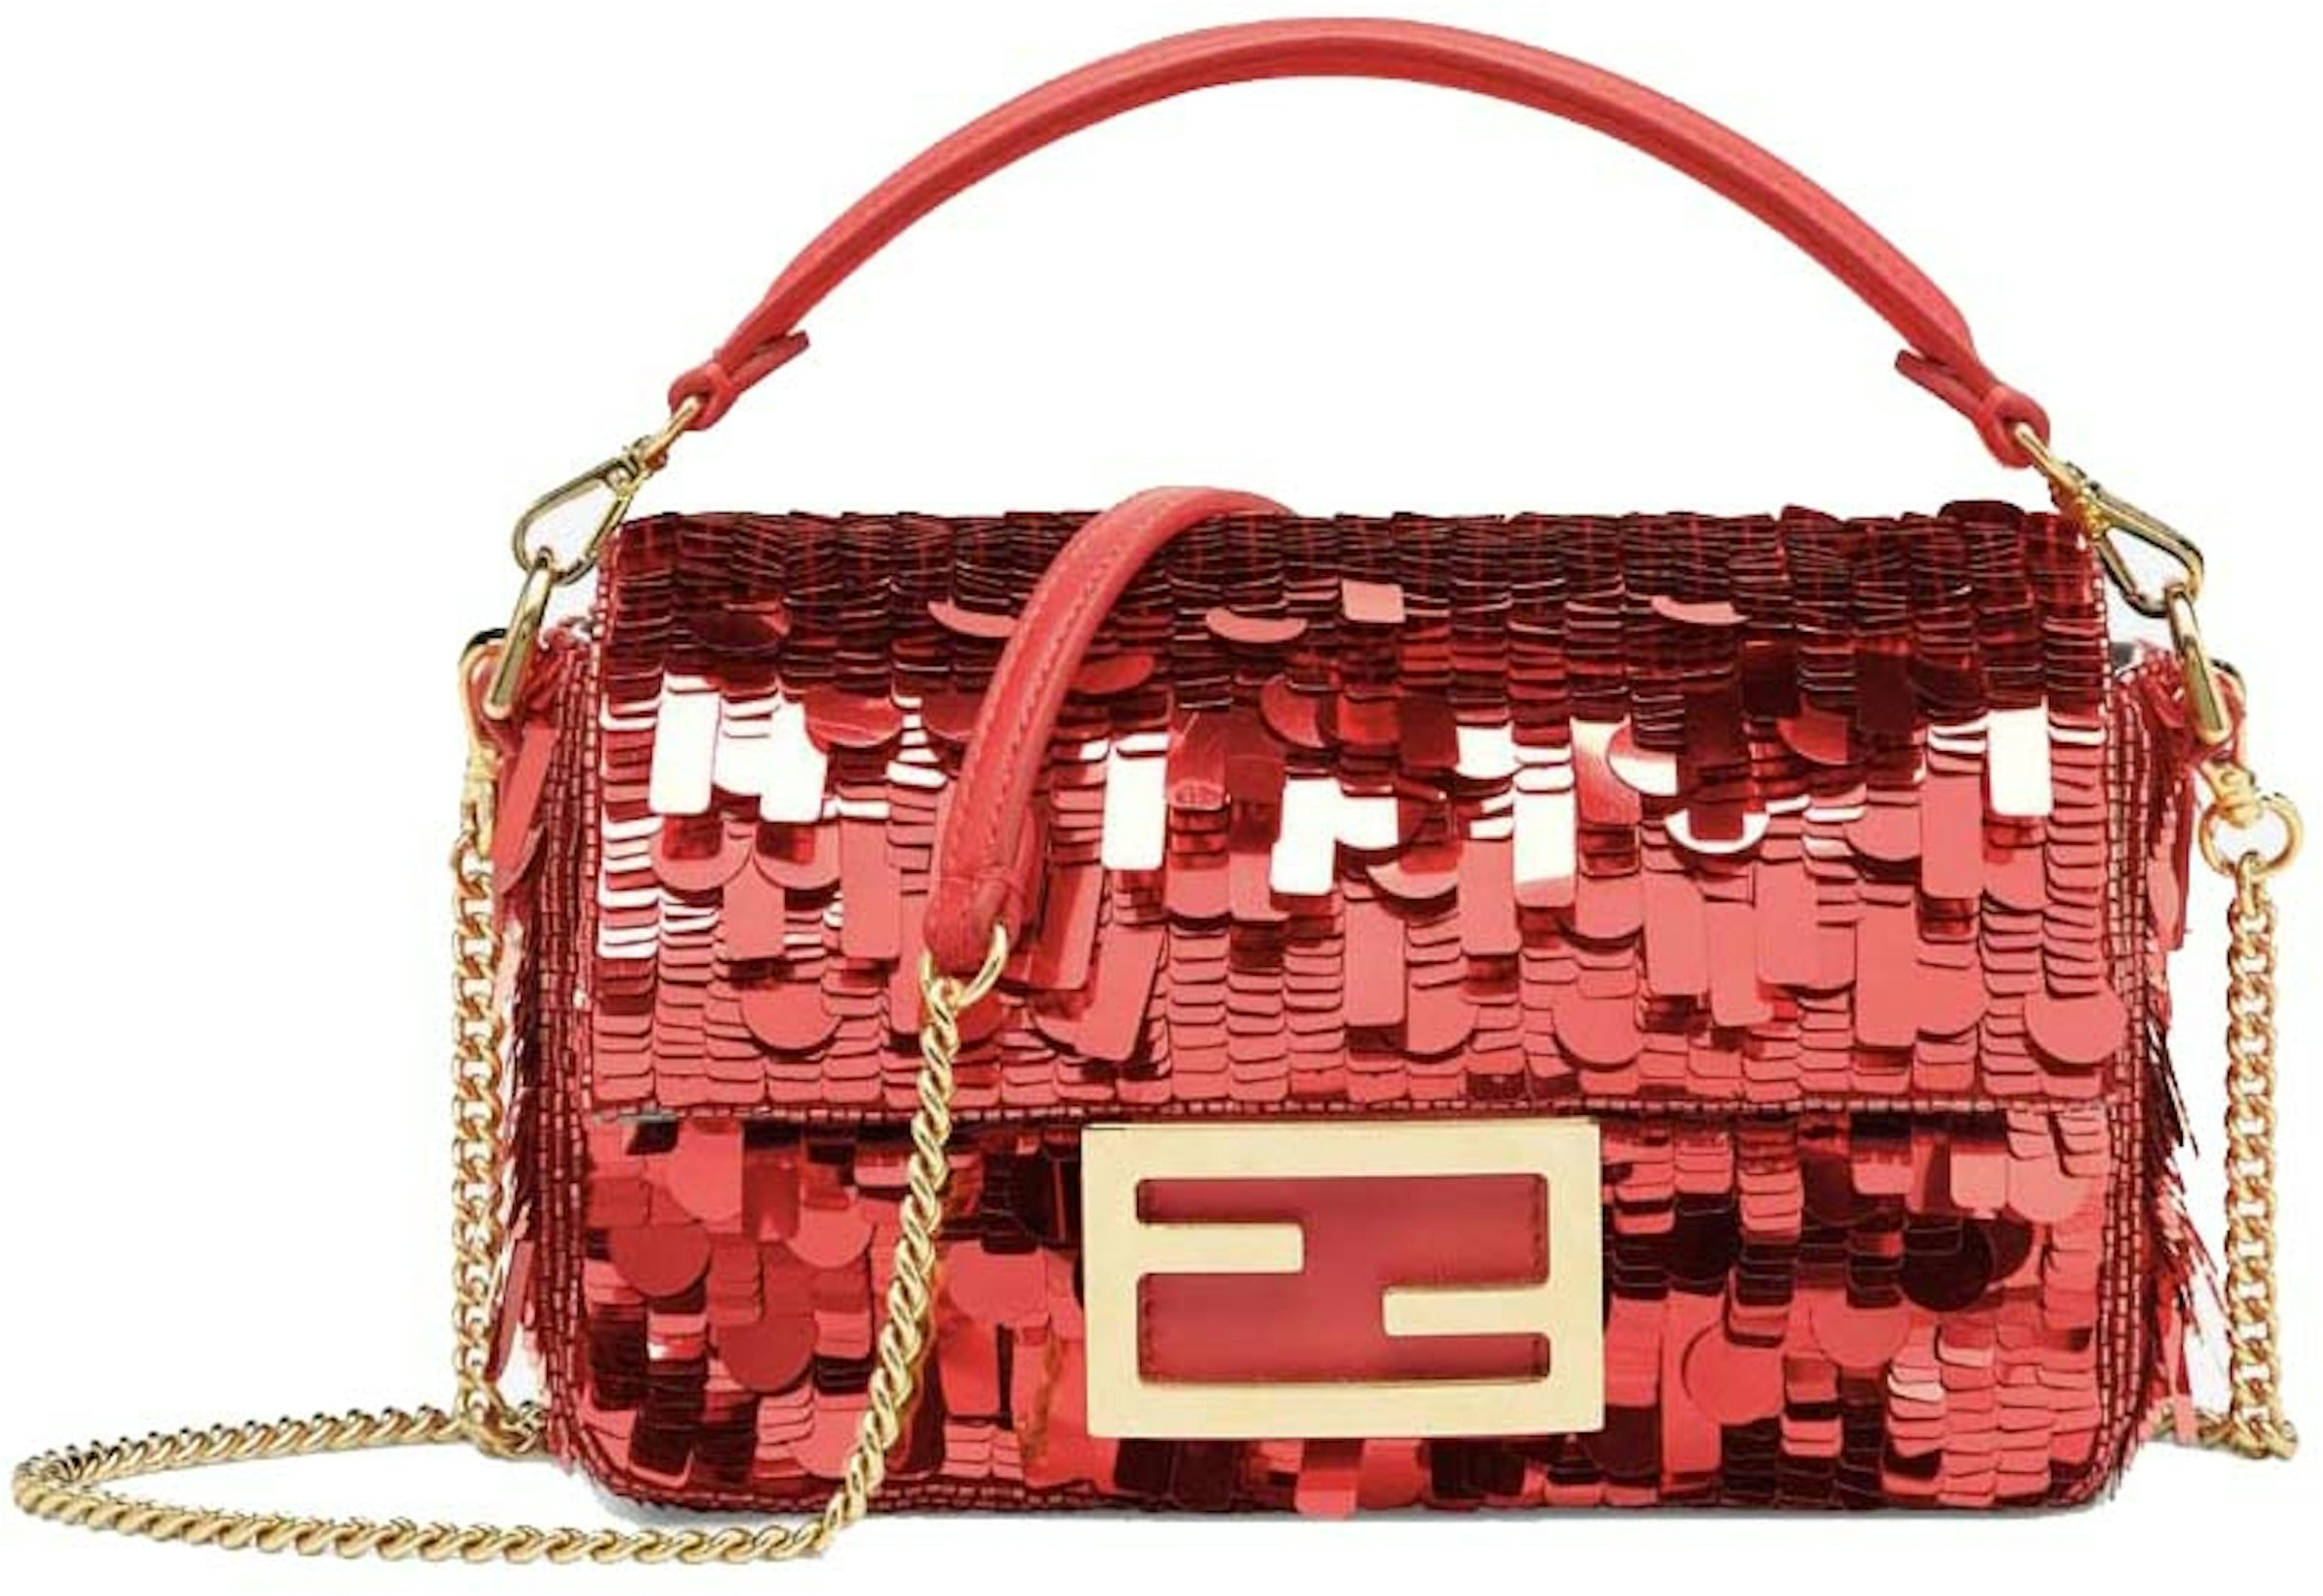 Baguette - Pink sequin and leather bag